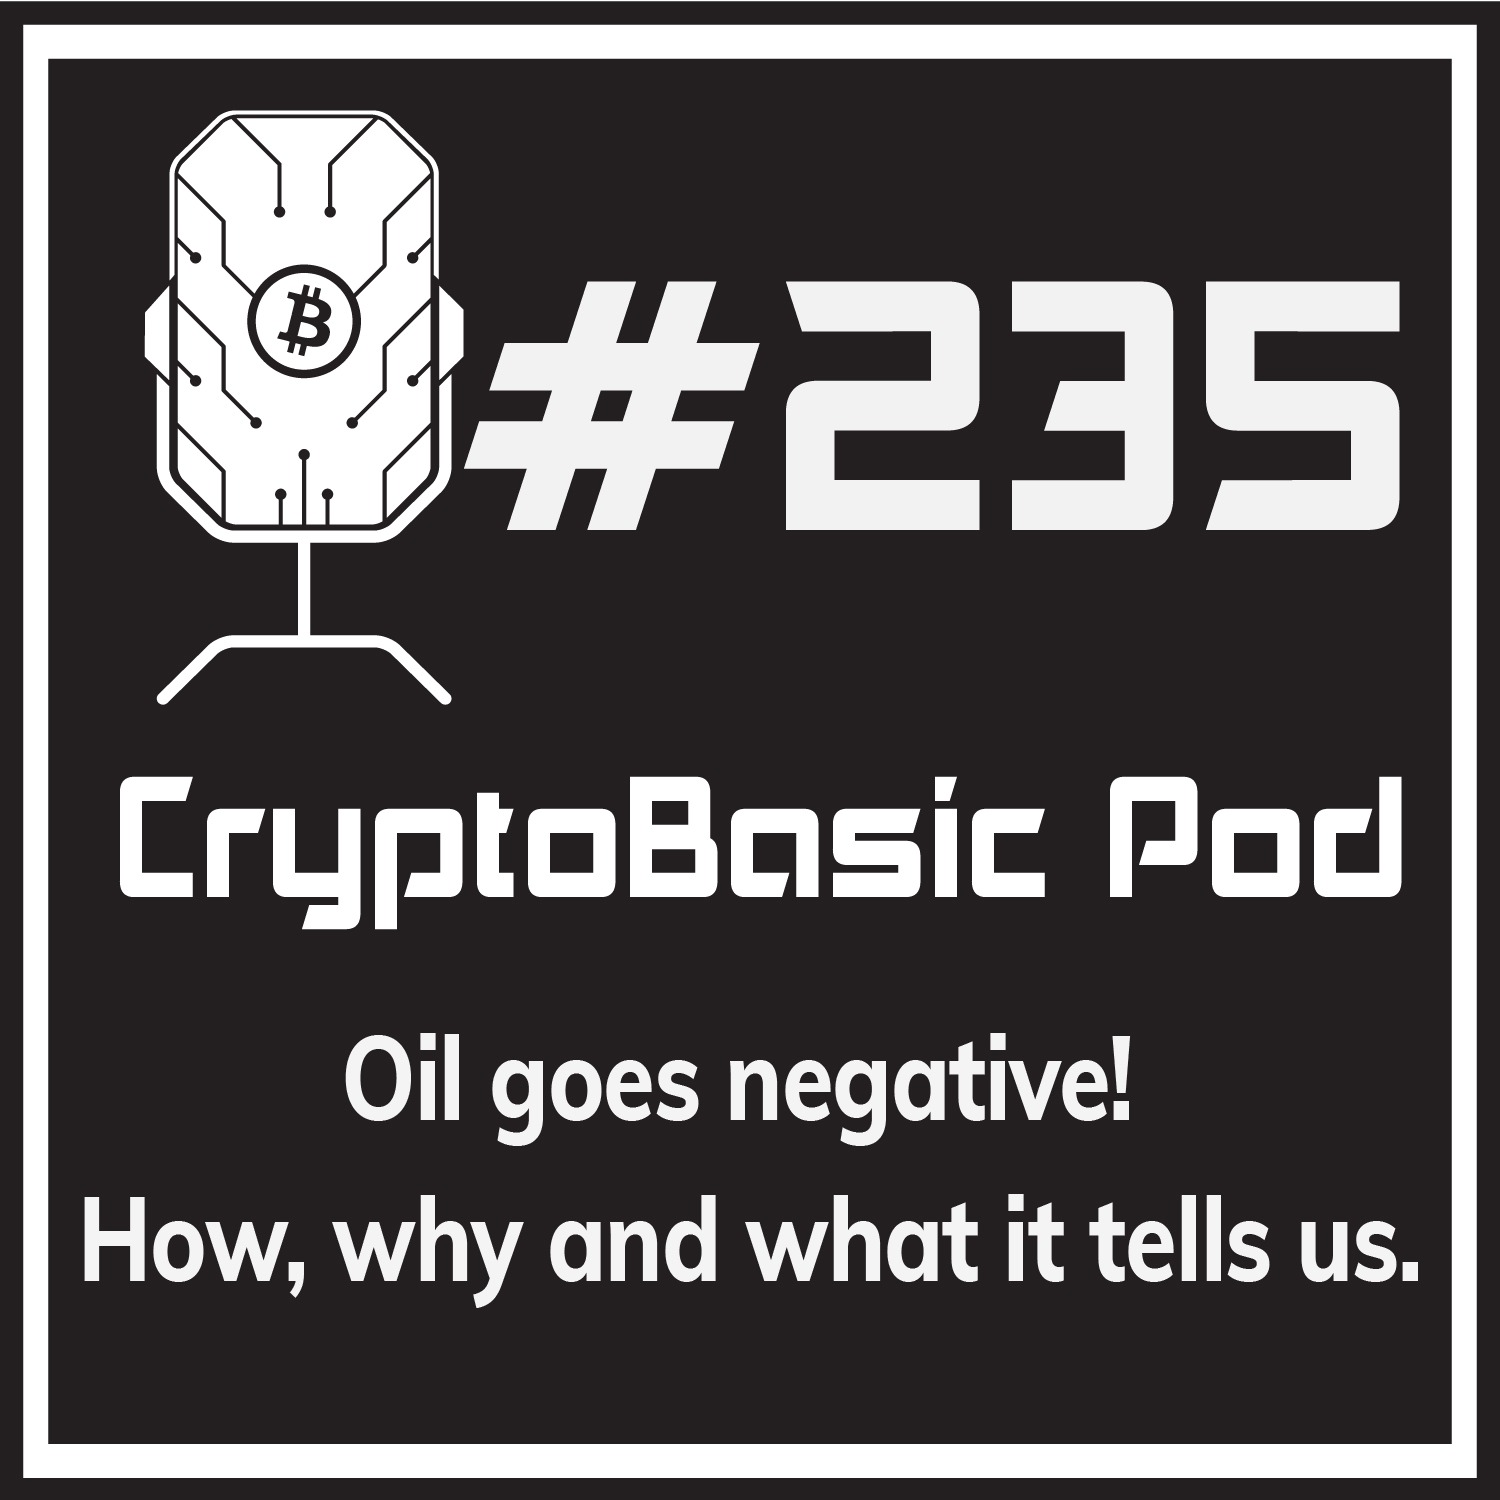 Episode 235 - Oil goes negative! How, why and what it tells us.